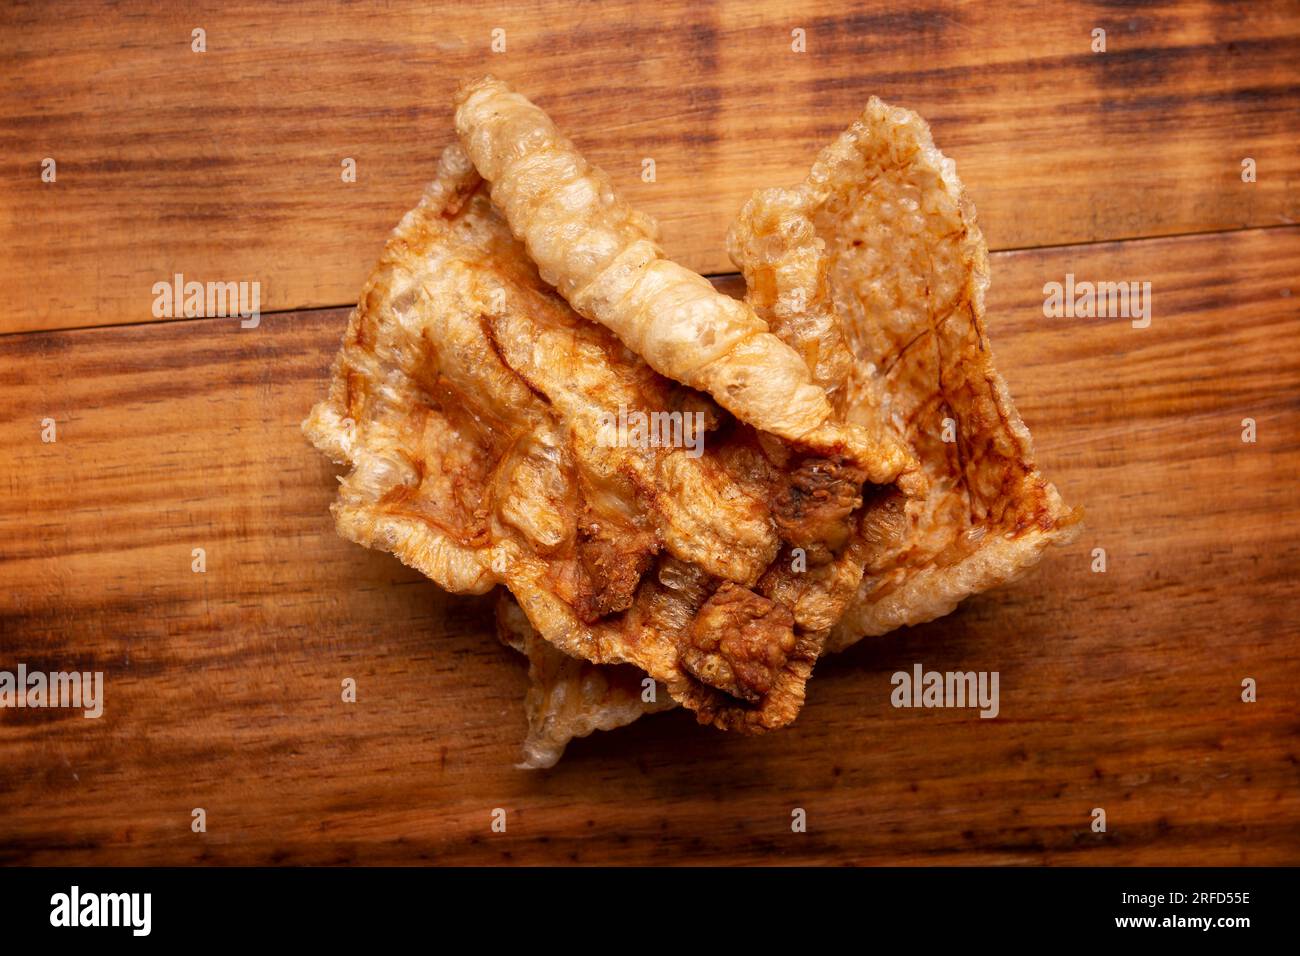 Chicharron. Crispy Fried pork rind, are pieces of aired and fried pork skin, traditional Mexican ingredient or snack. Table topview. Stock Photo